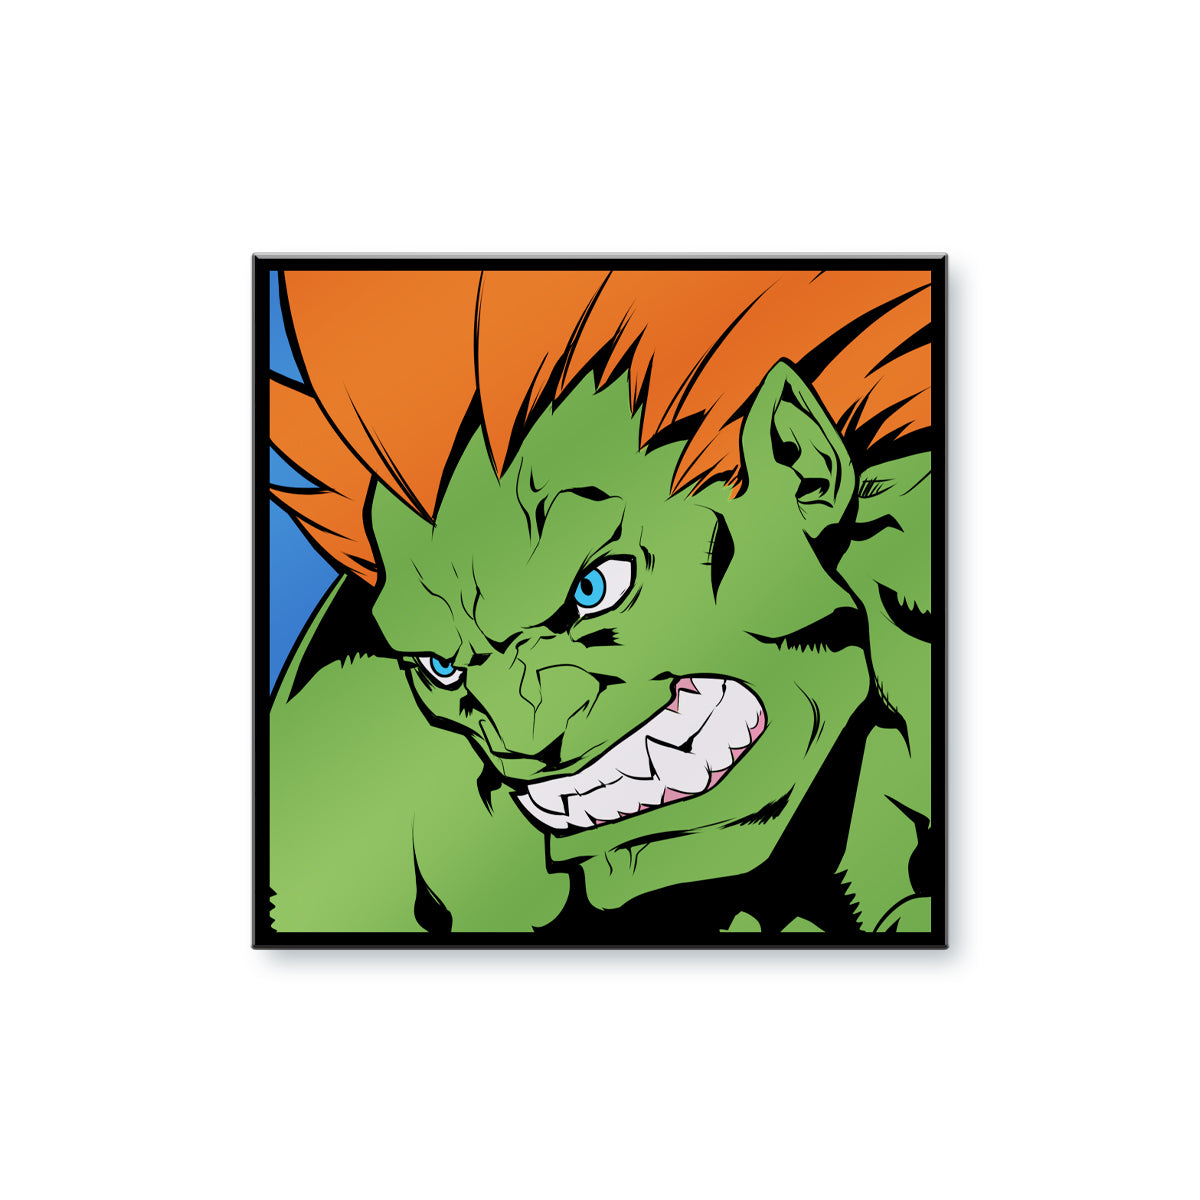 Blanka Street Fighter 2 Turbo moves list, strategy guide, combos and  character overview